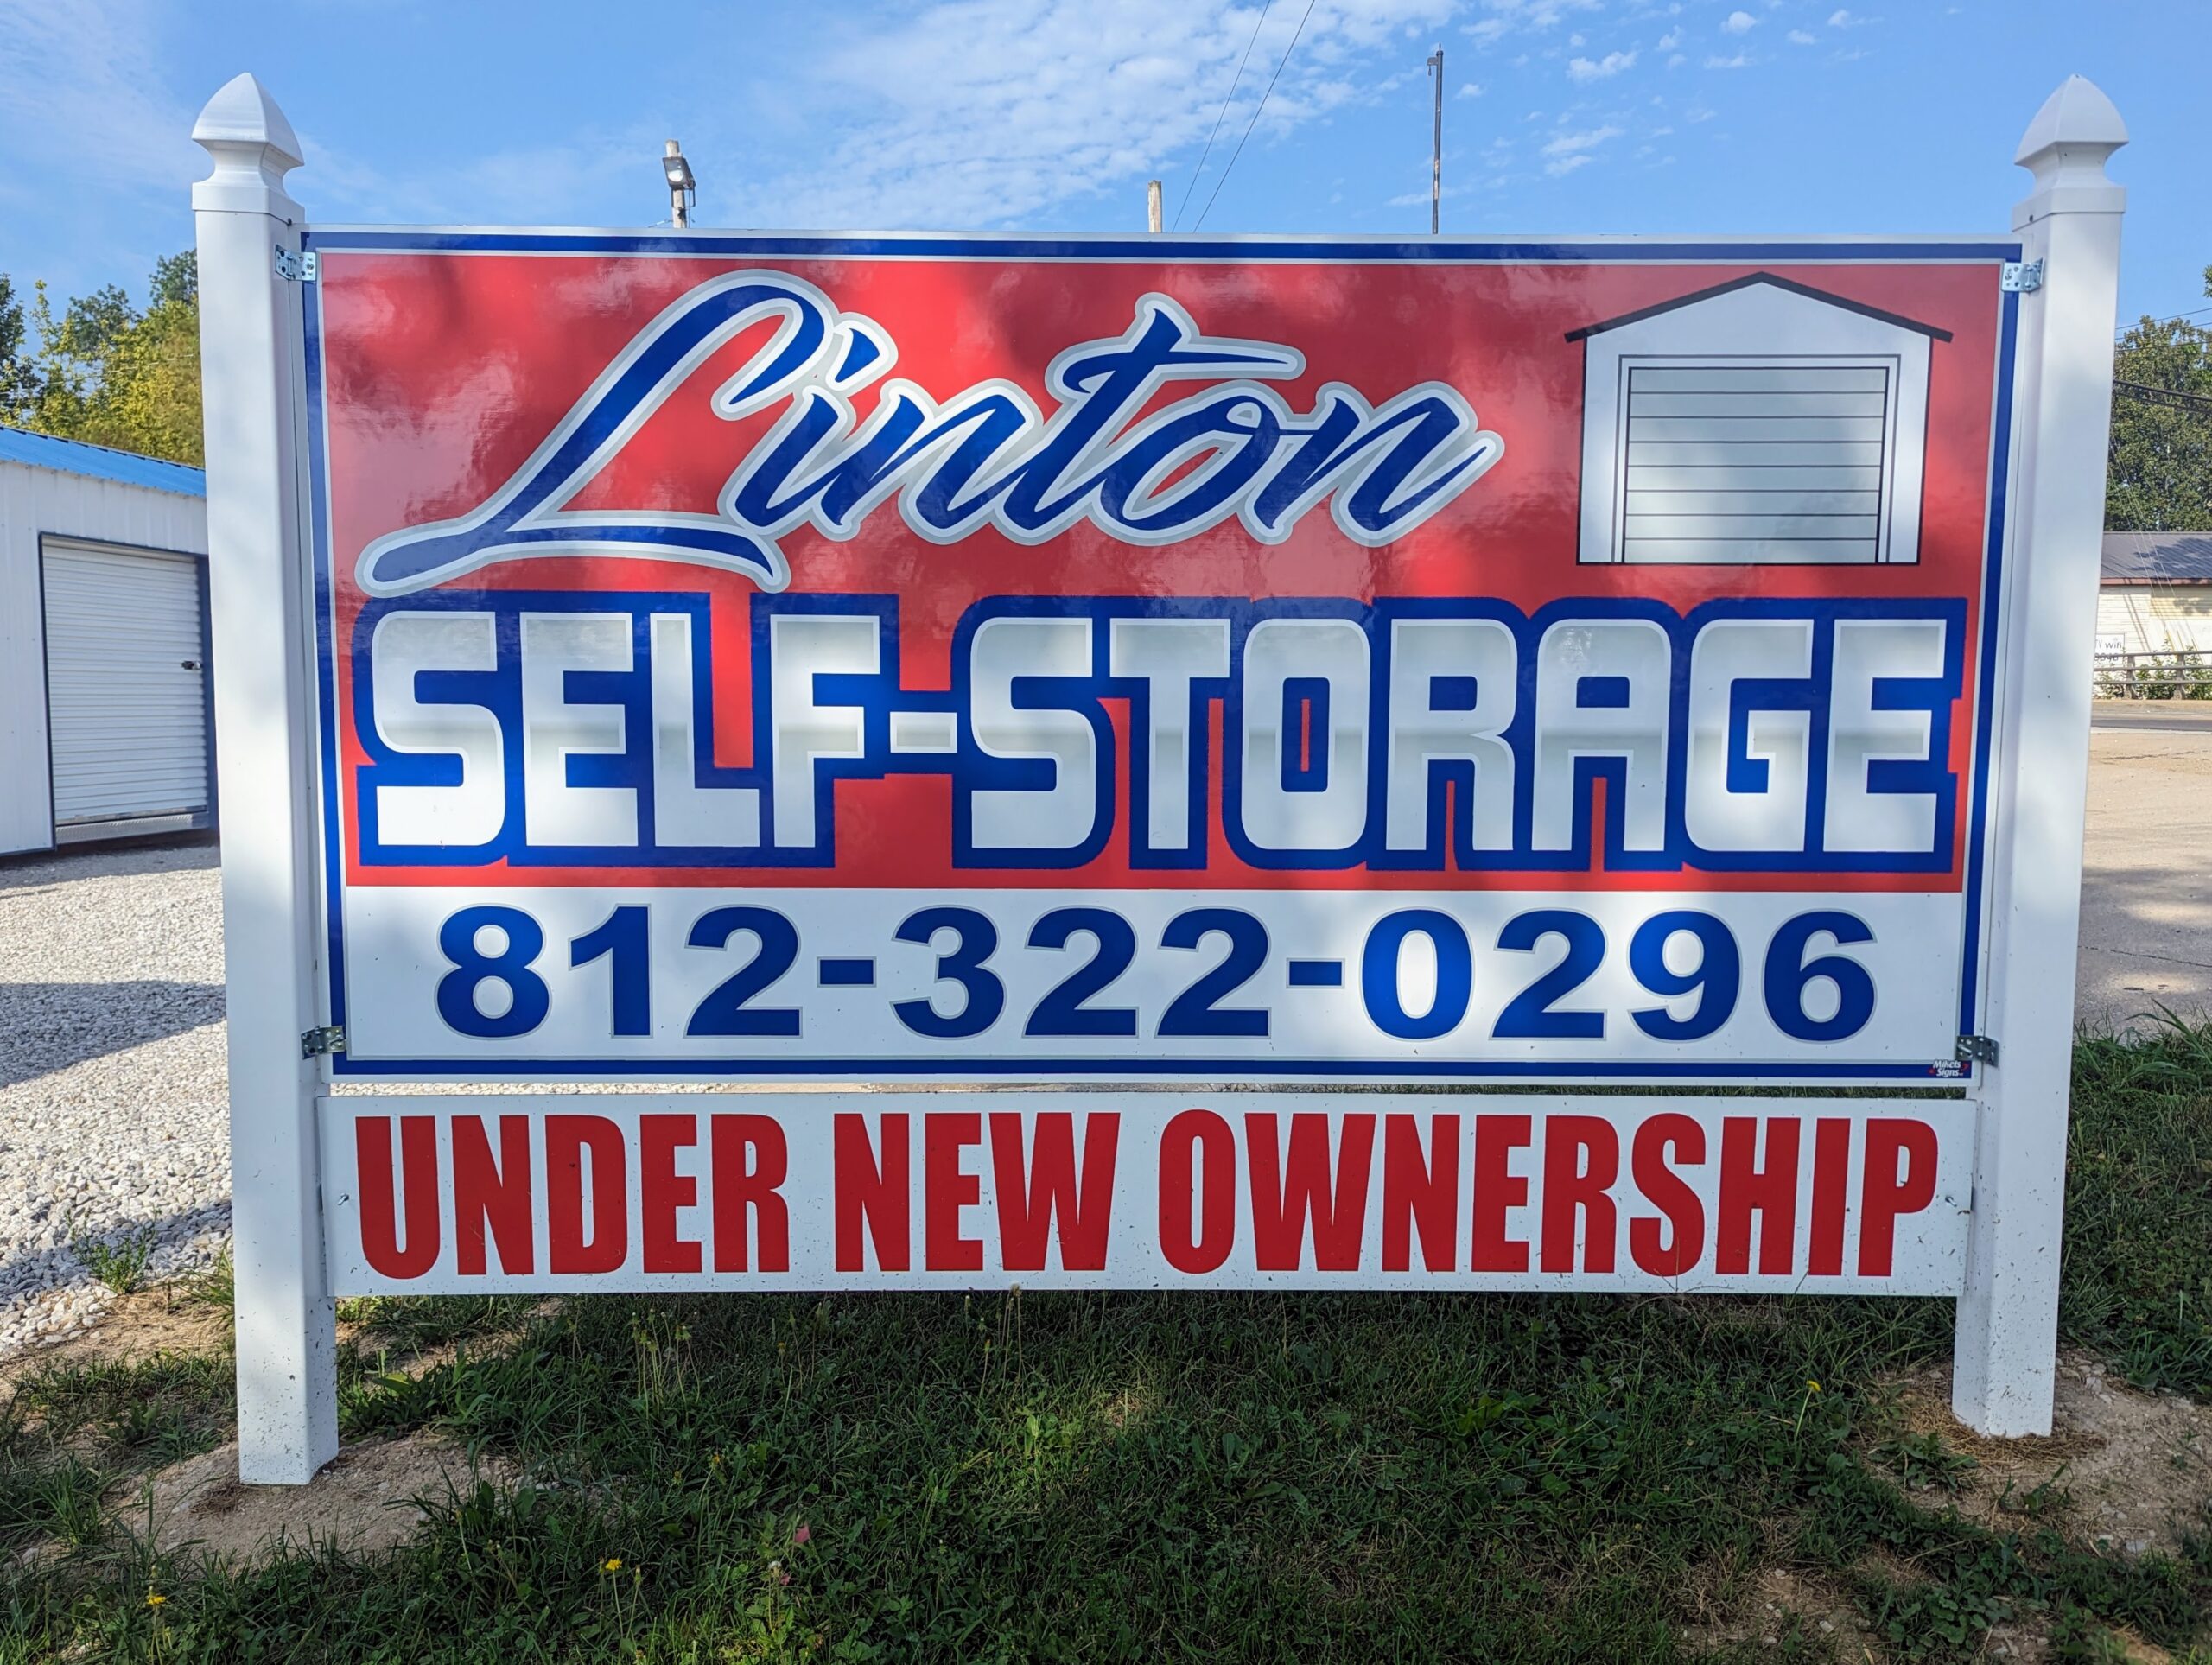 Linton Self Storage - 812-322-0296 - Front Sign